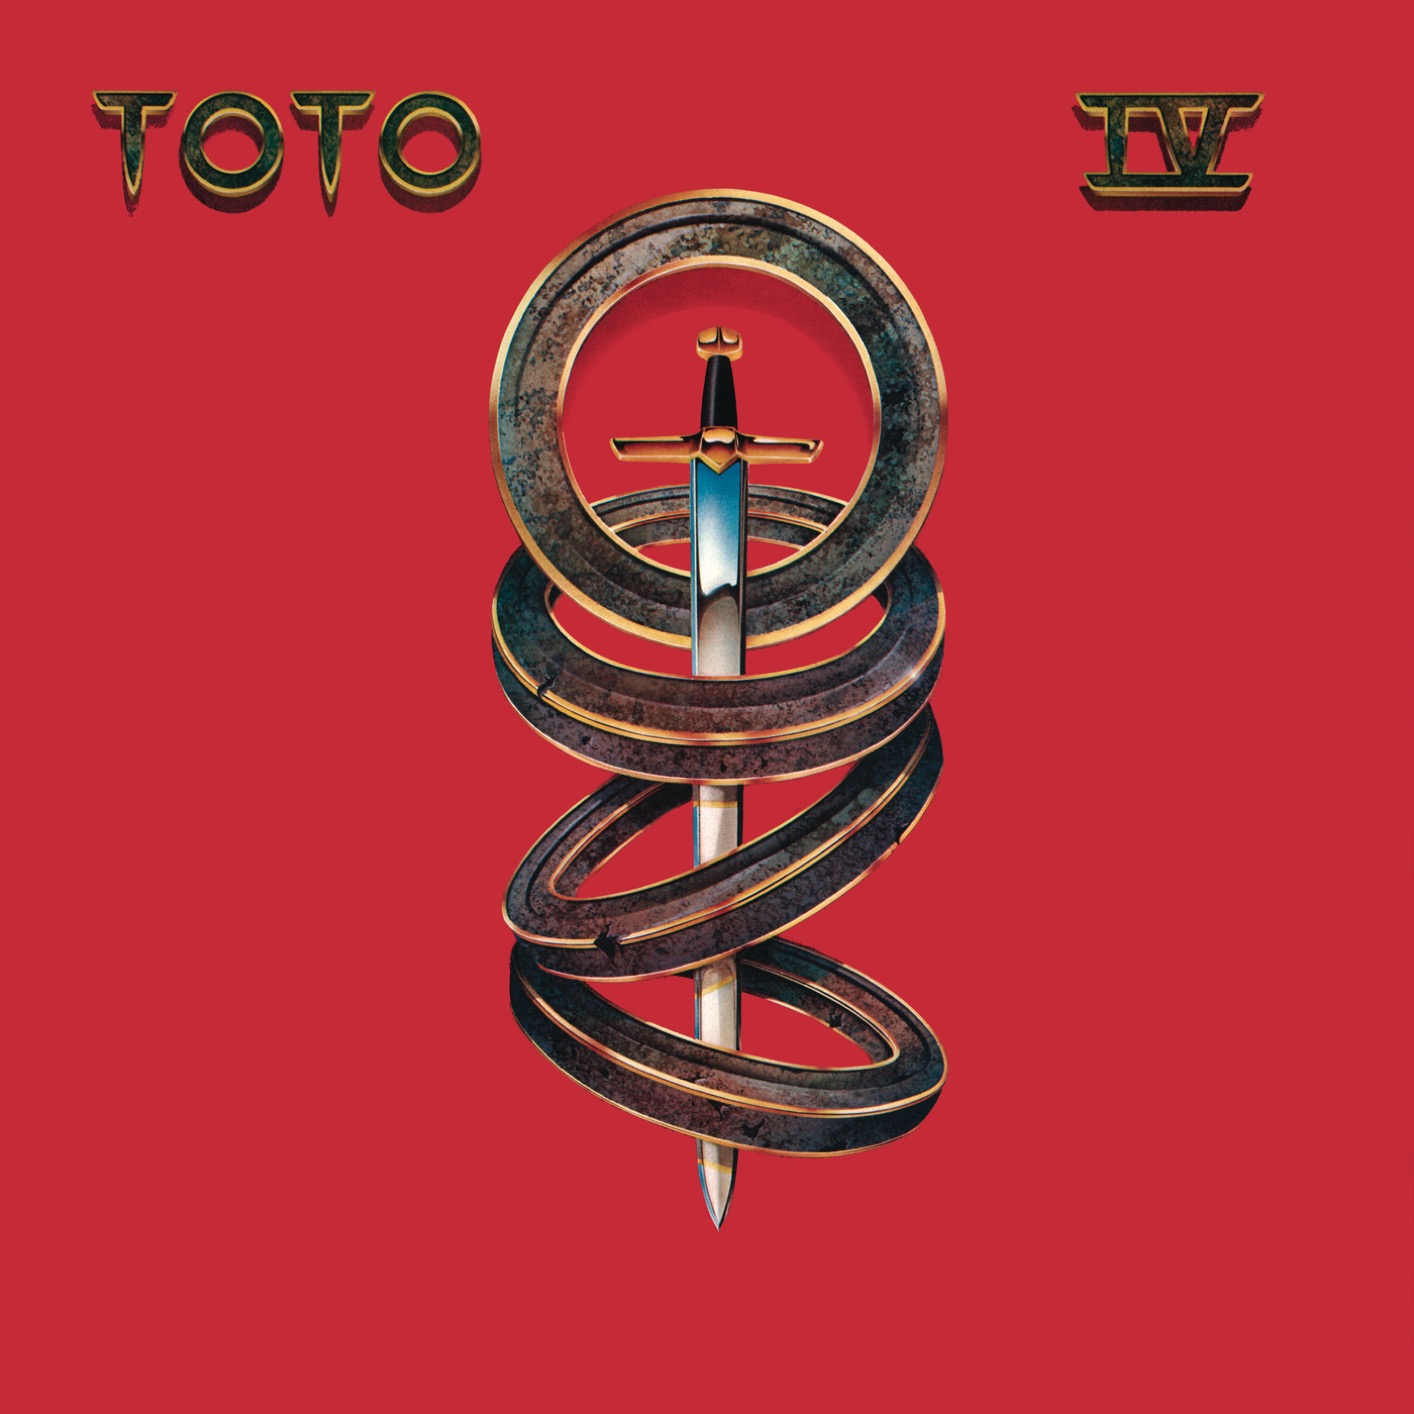 Hotworks リイシュー リマスターだと Toto Toto Iv The Alan Parsons Project Ammonia Avenue Iggy Pop The Bowie Years は上半期ベスト 特にtoto Ivの24 192ハイレゾは素晴らしい 上半期ベストアルバム T Co 6wisvdfe Twitter